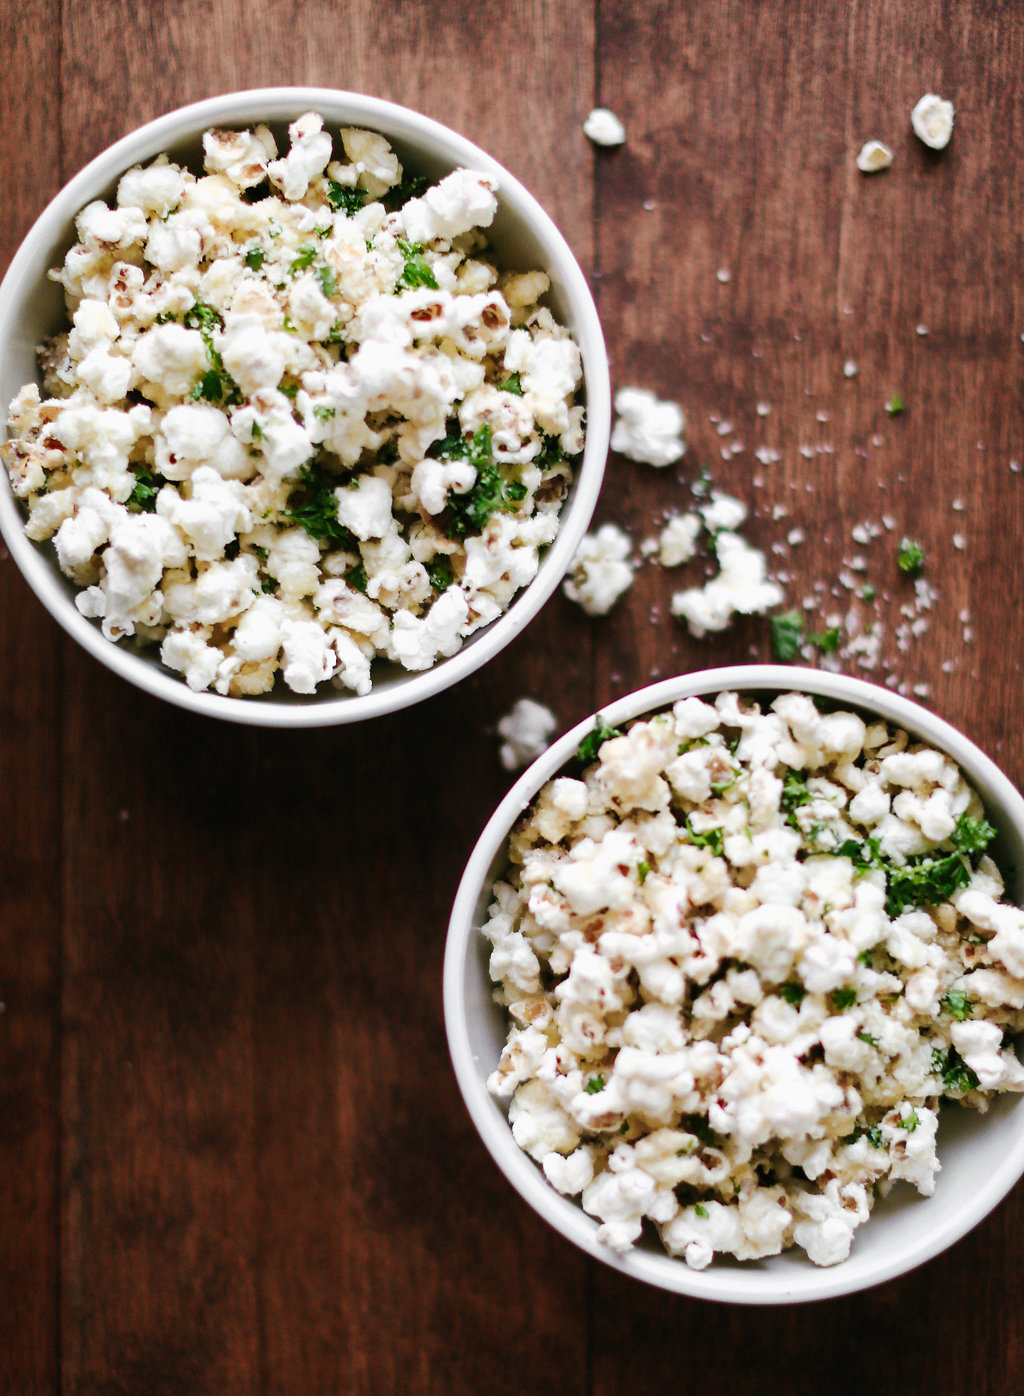 Everyone loves a good bowl of popcorn during a movie, so why not fancy it up a bit and serve some options. The Parmesan & Parsley popcorn is perfect for your 